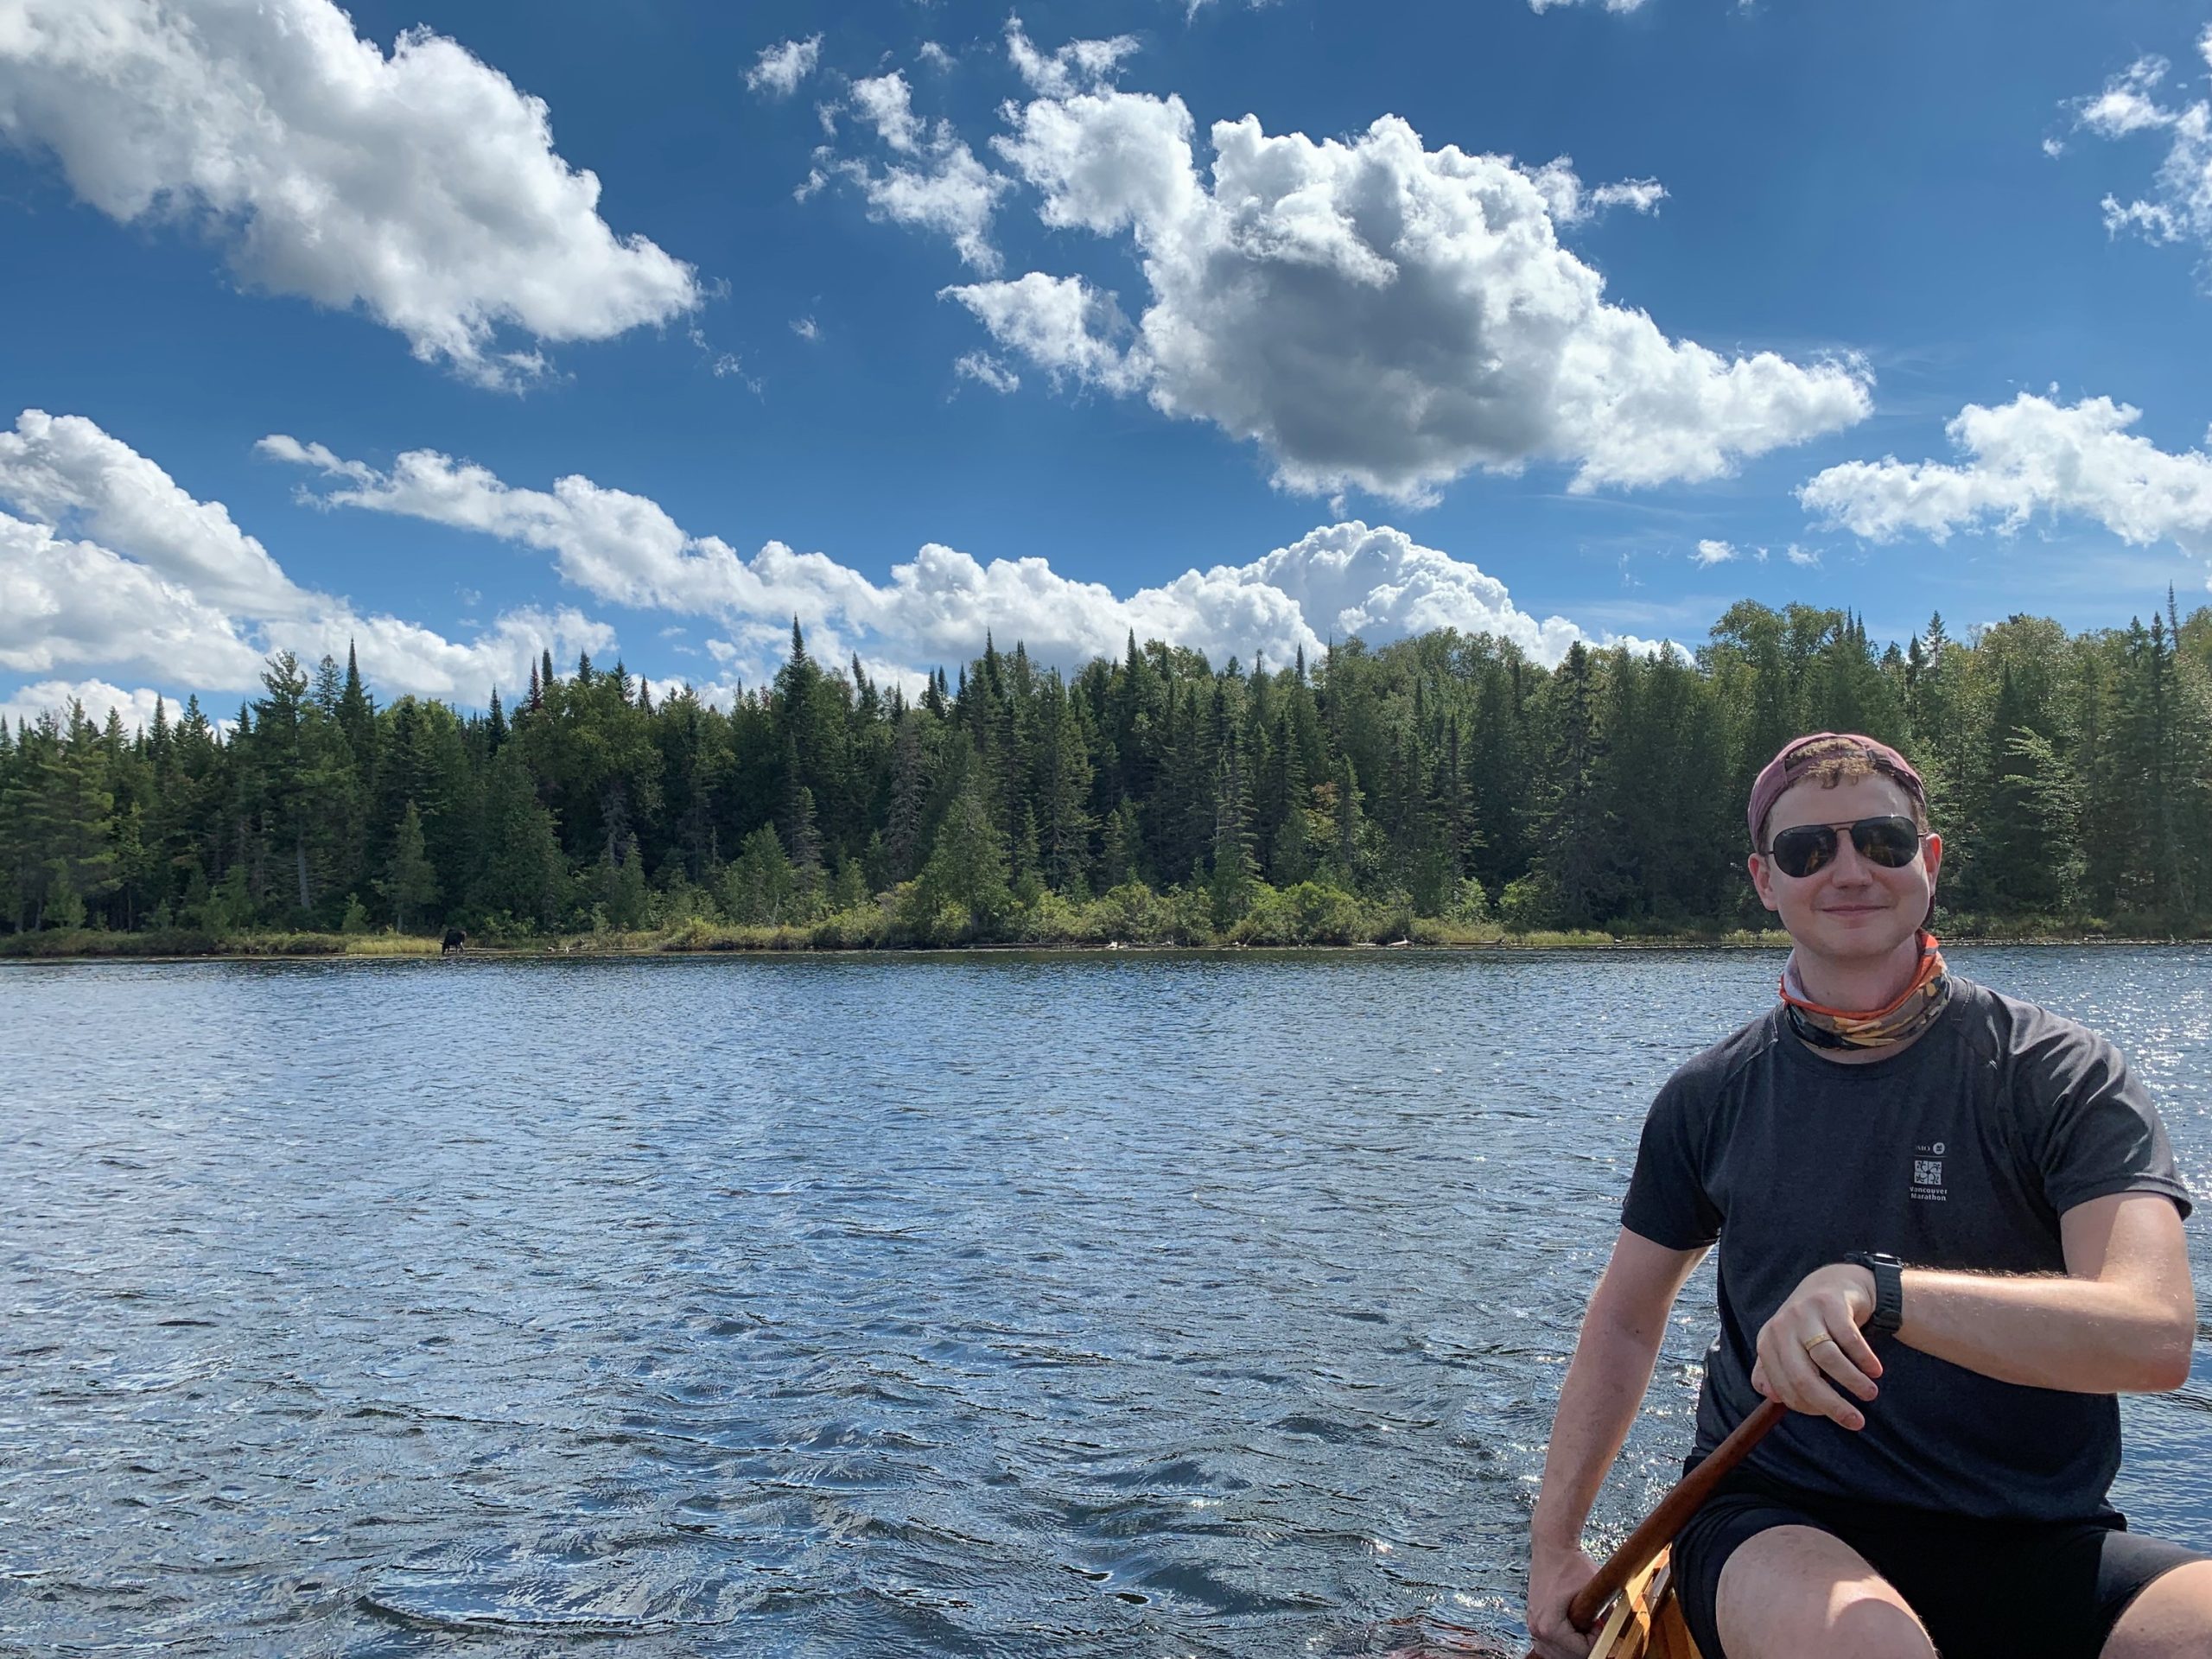 JR enjoying one of his favourite hobbies, canoe tripping in Algonquin Park. The sky is blue and filled with fluffy clouds. There is a line of forest in the middle with water below. JR is positioned at the right of the frame, wearing a dark t-shirt and sunglasses.